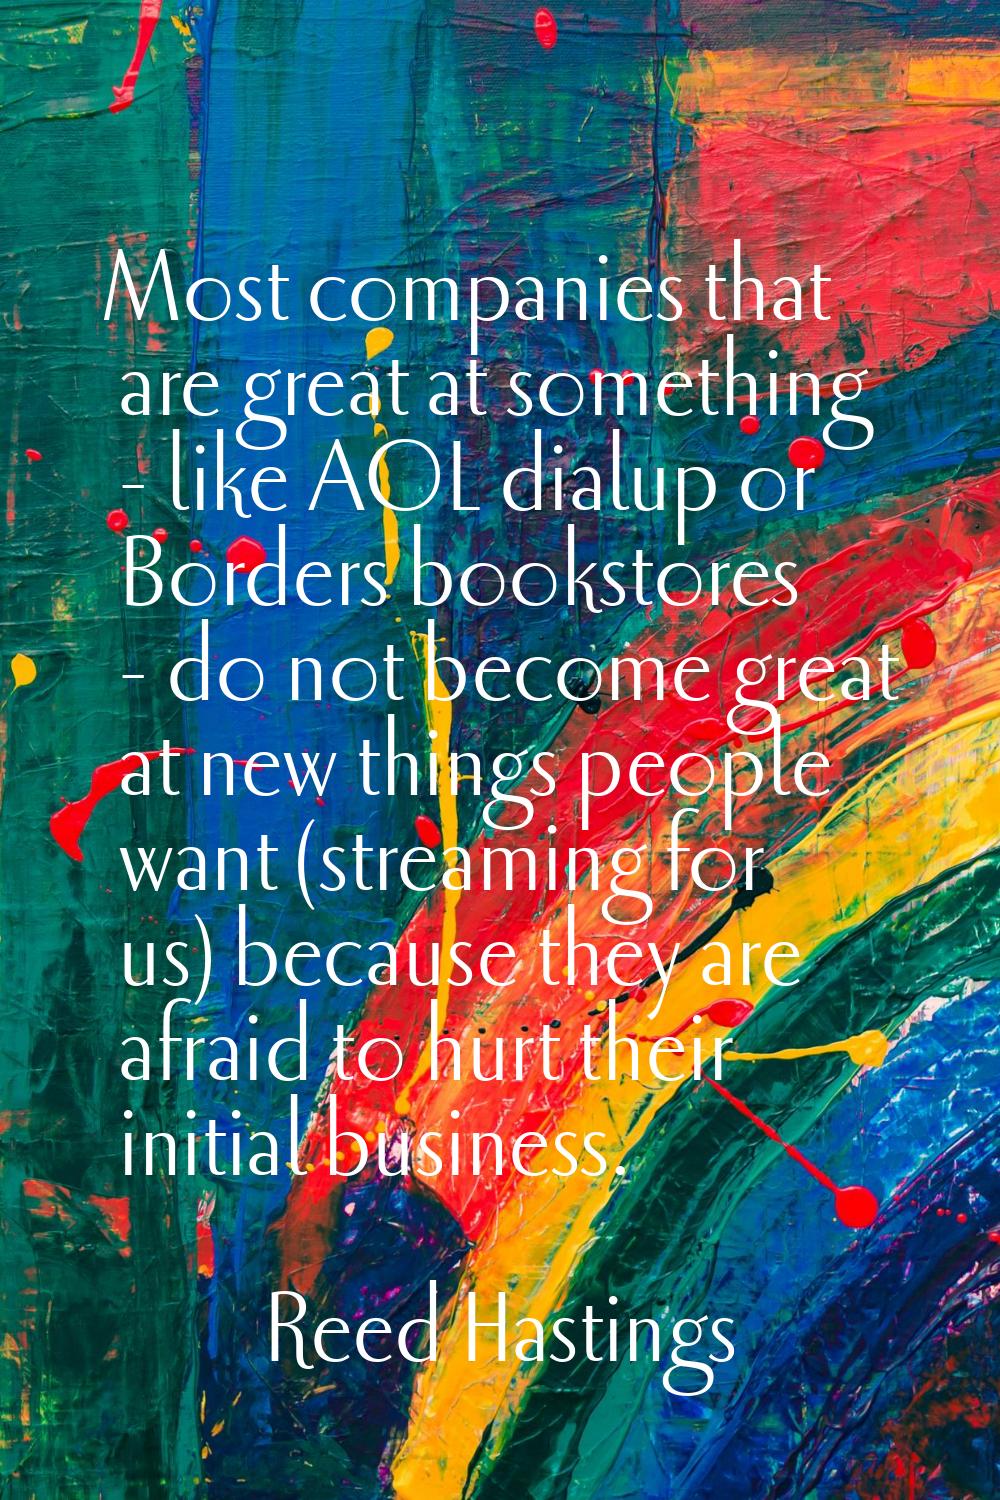 Most companies that are great at something - like AOL dialup or Borders bookstores - do not become 